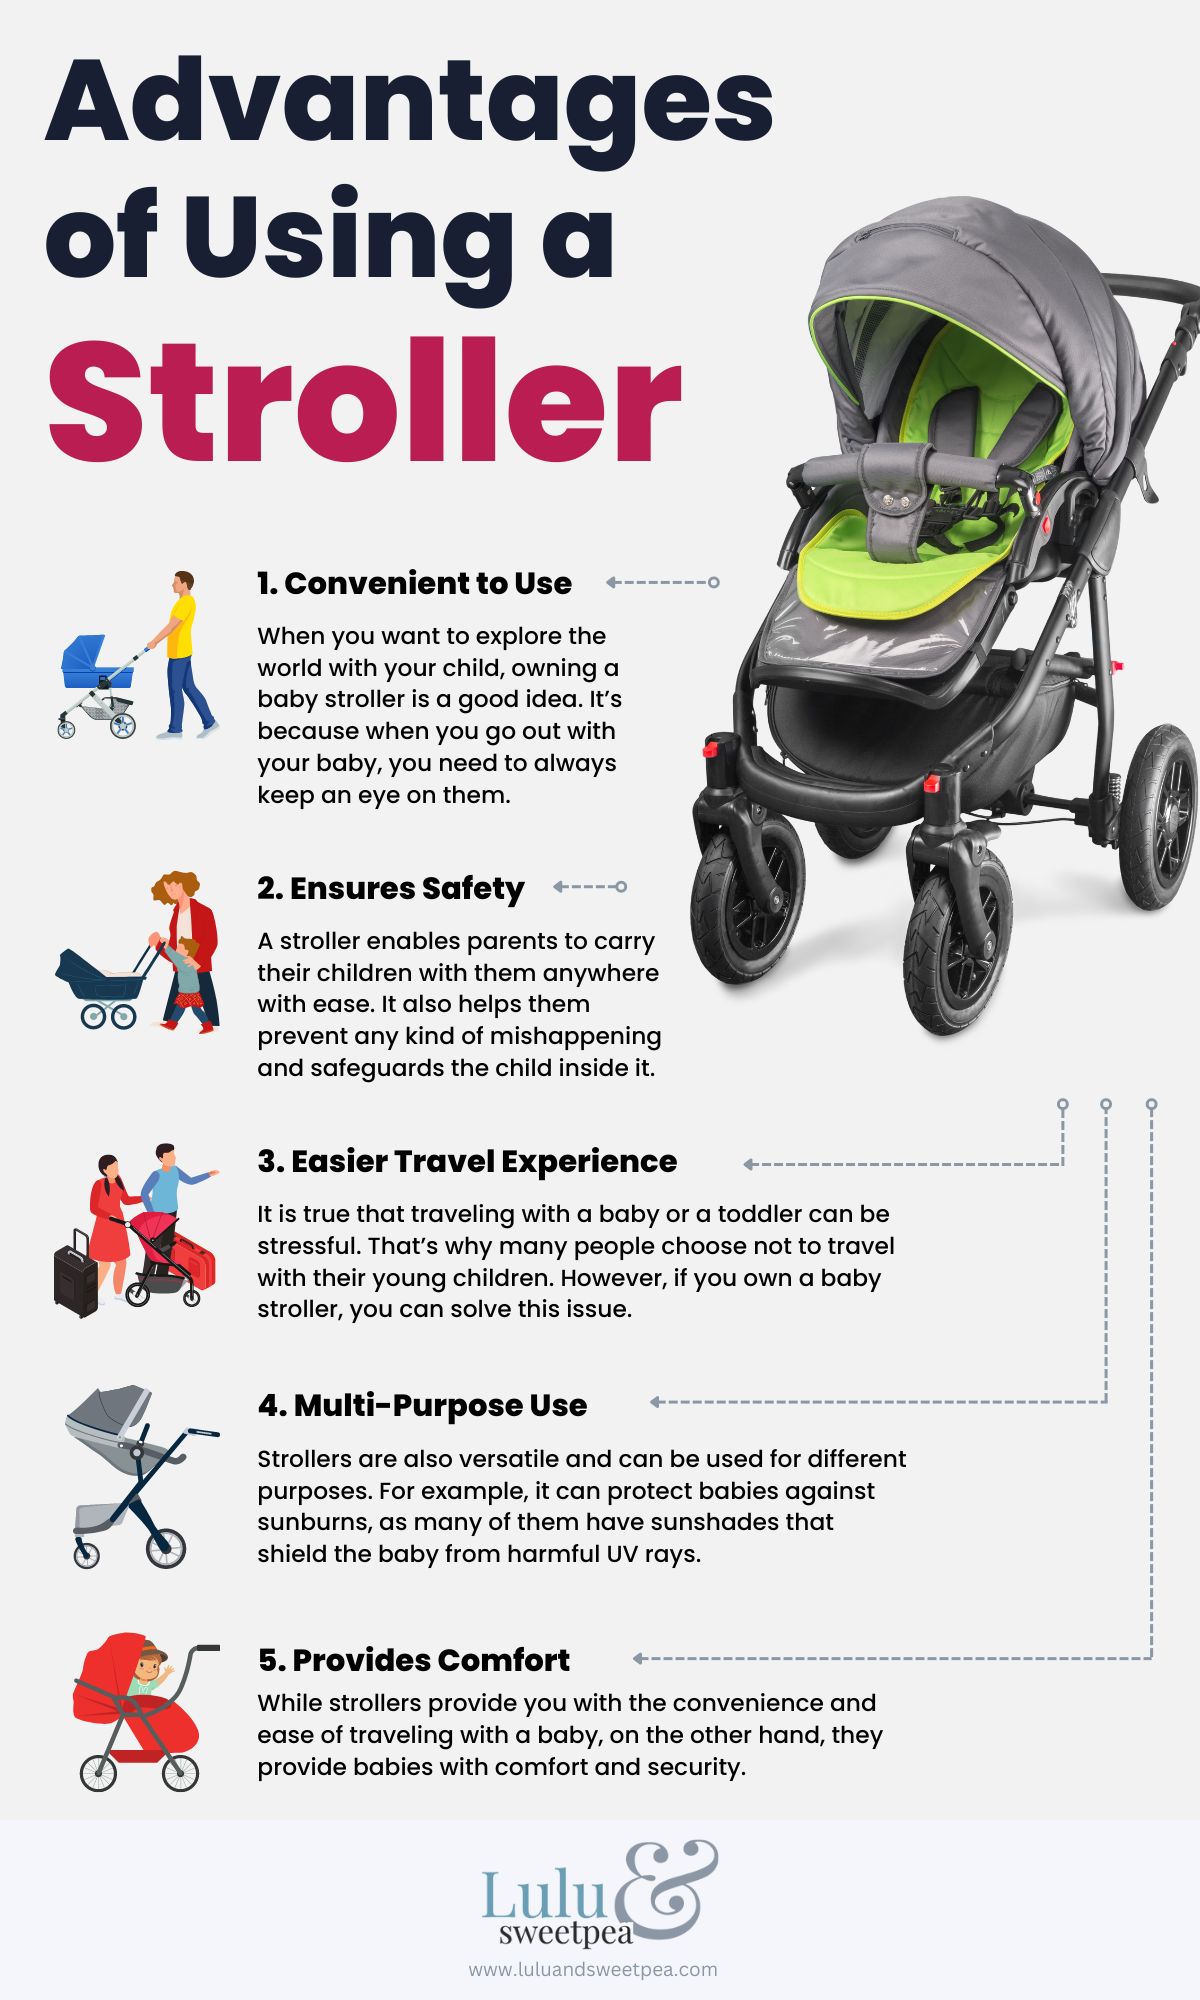 Advantages of Using a Stroller